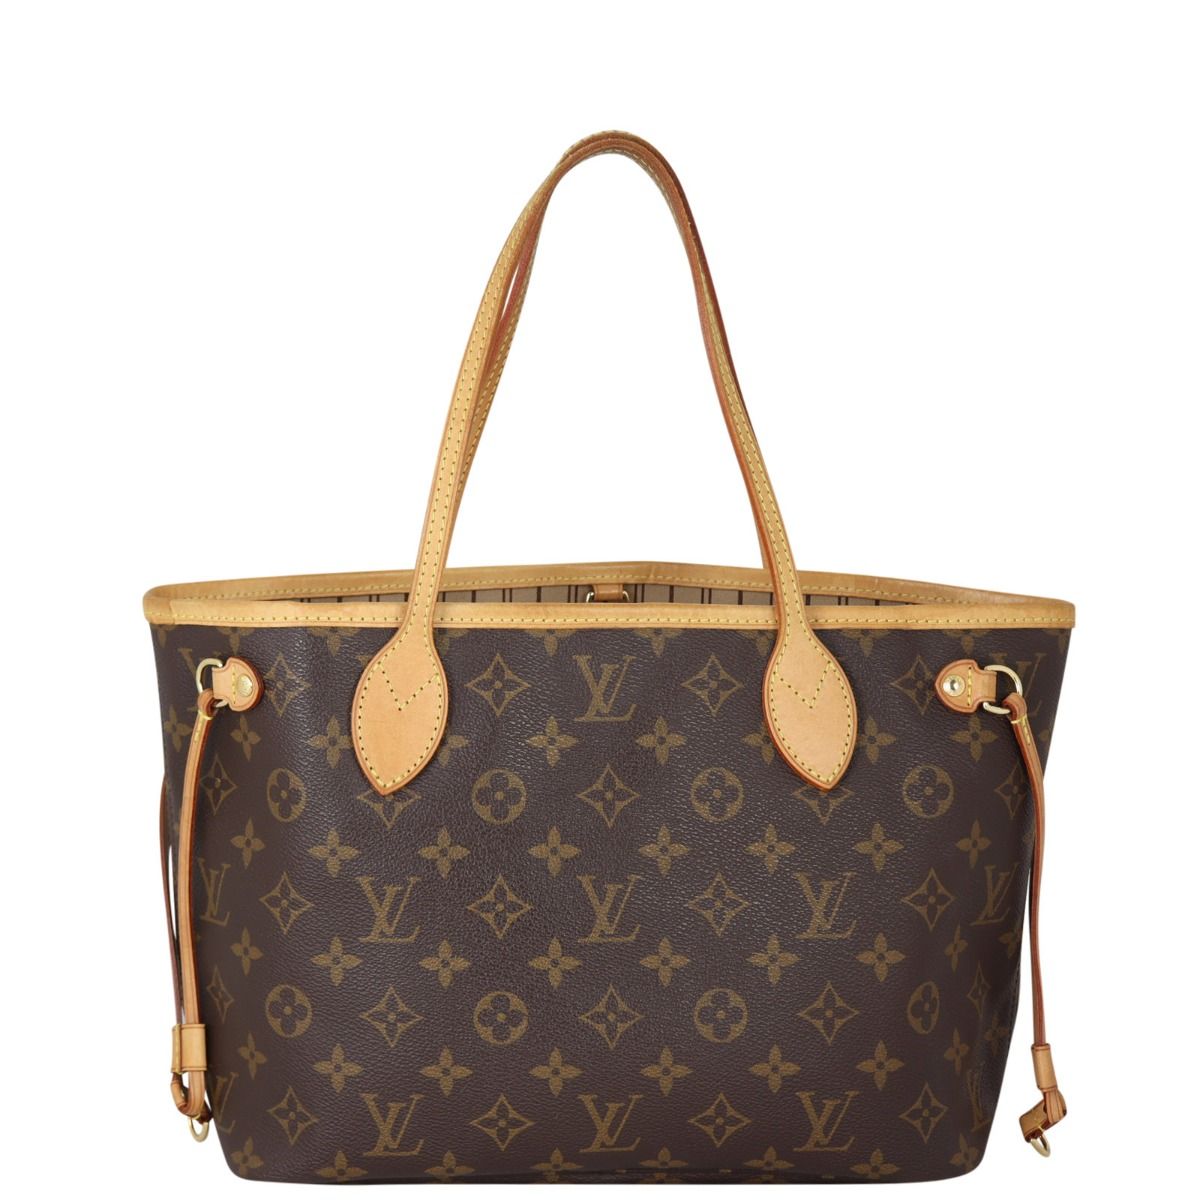 Louis Vuitton Neverfull - A full review on this timeless tote + photos!